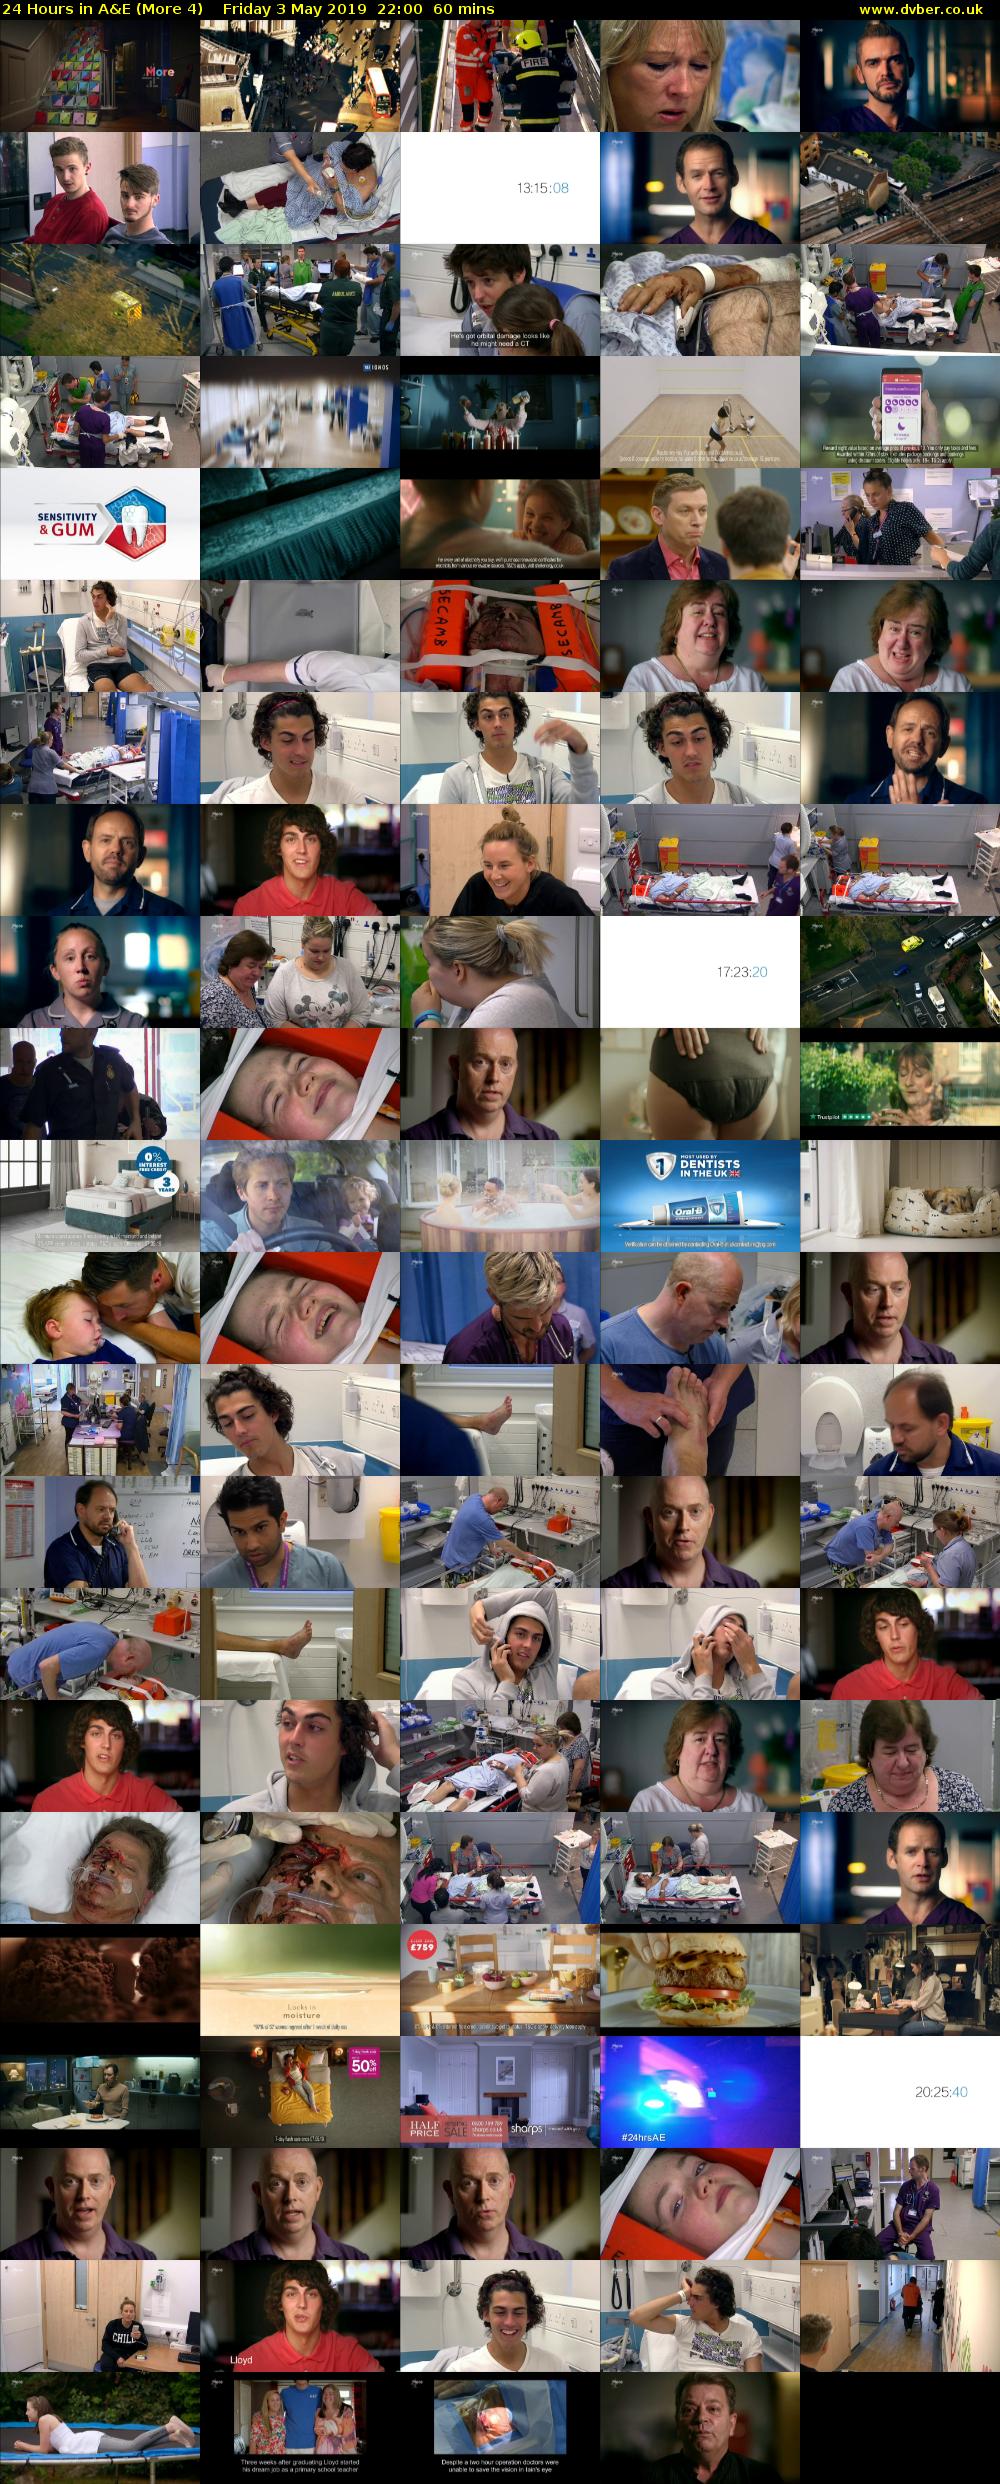 24 Hours in A&E (More 4) Friday 3 May 2019 22:00 - 23:00